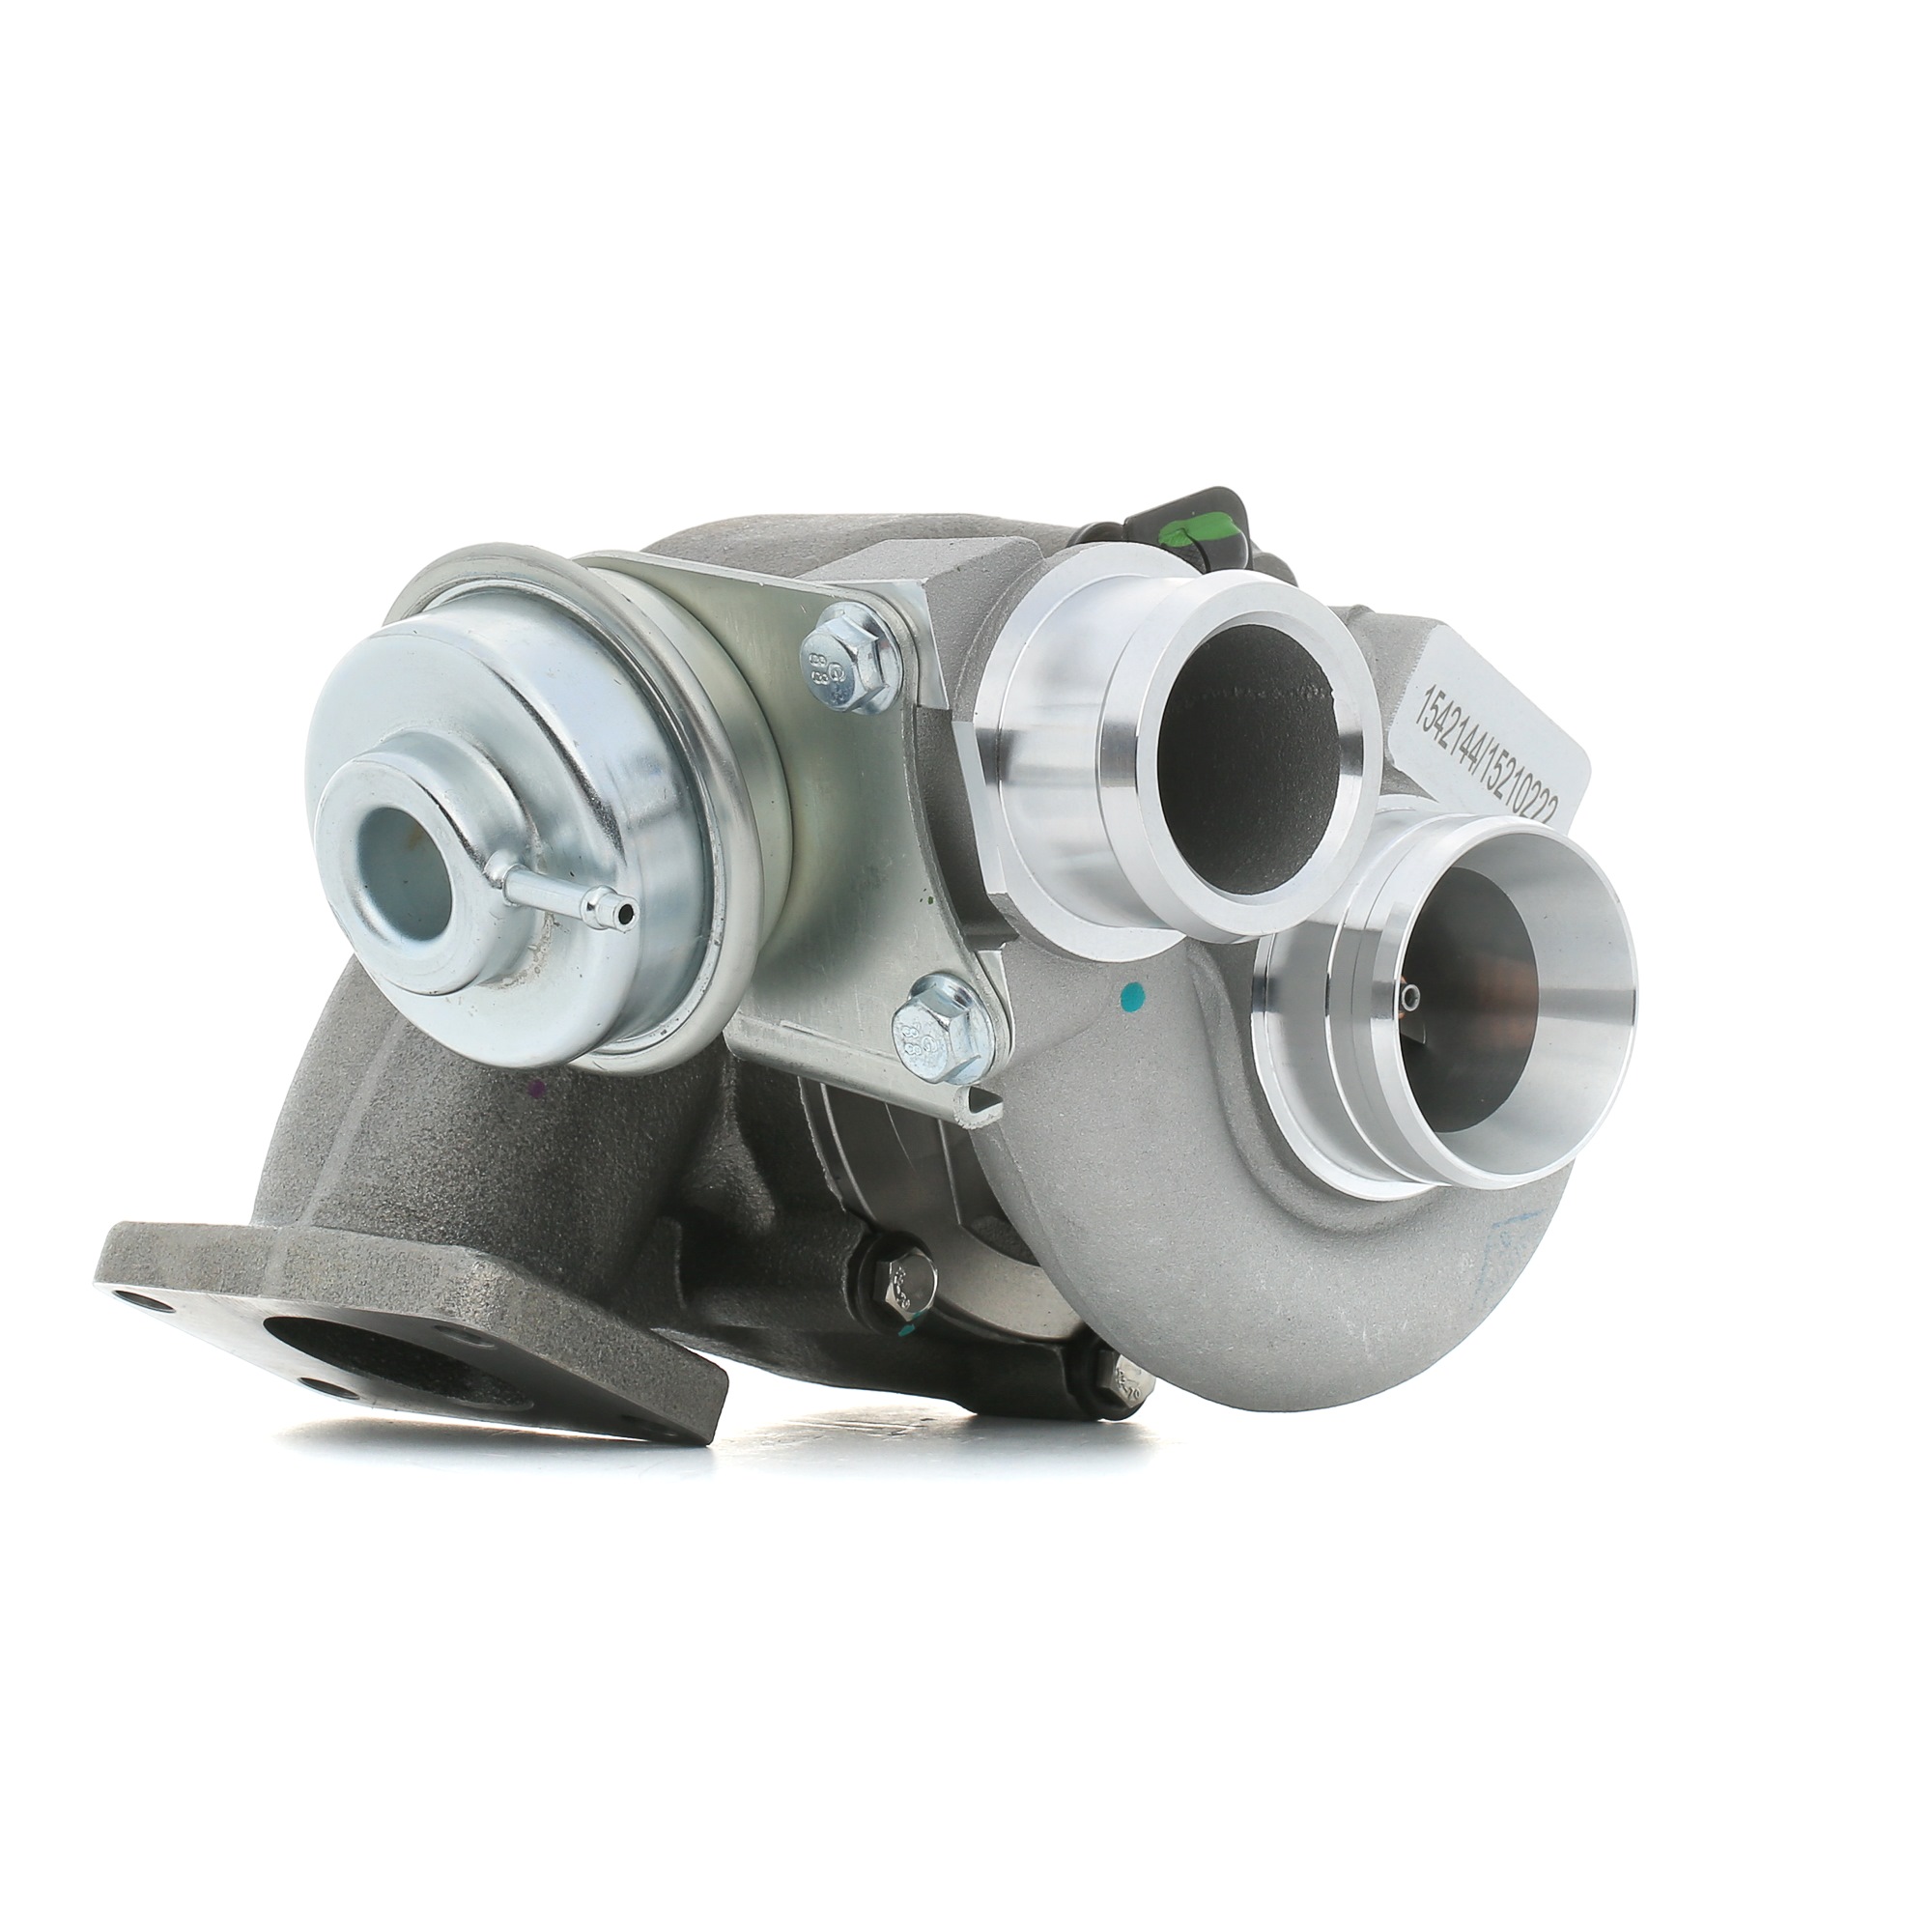 RIDEX 2234C0194 Turbocharger Exhaust Turbocharger, Euro 4 (D4), Air cooled, Vacuum-controlled, with gaskets/seals